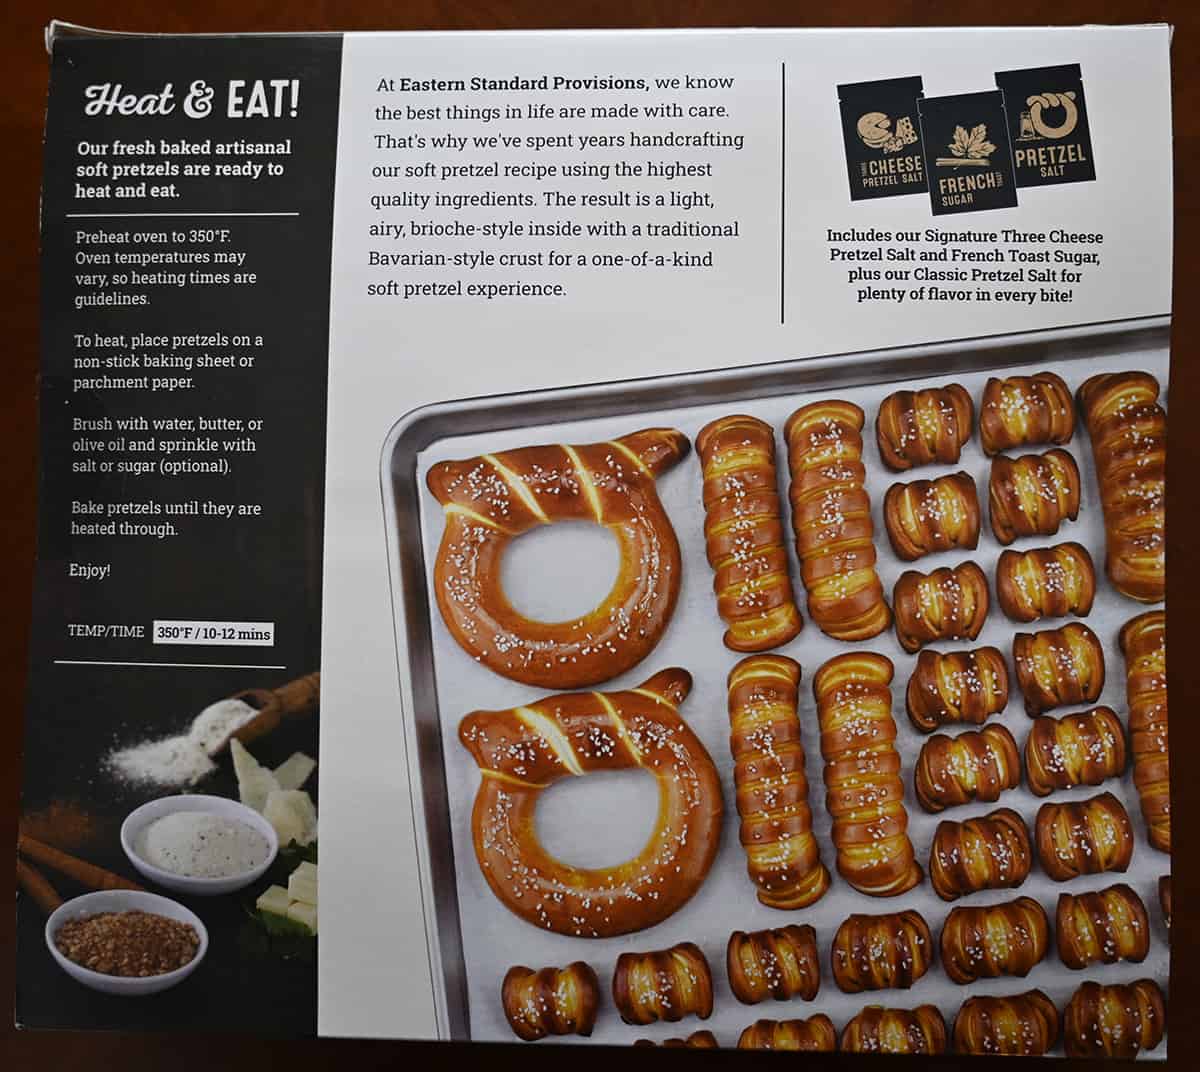 Image of the back of the box of pretzels showing company description and cooking instructions.